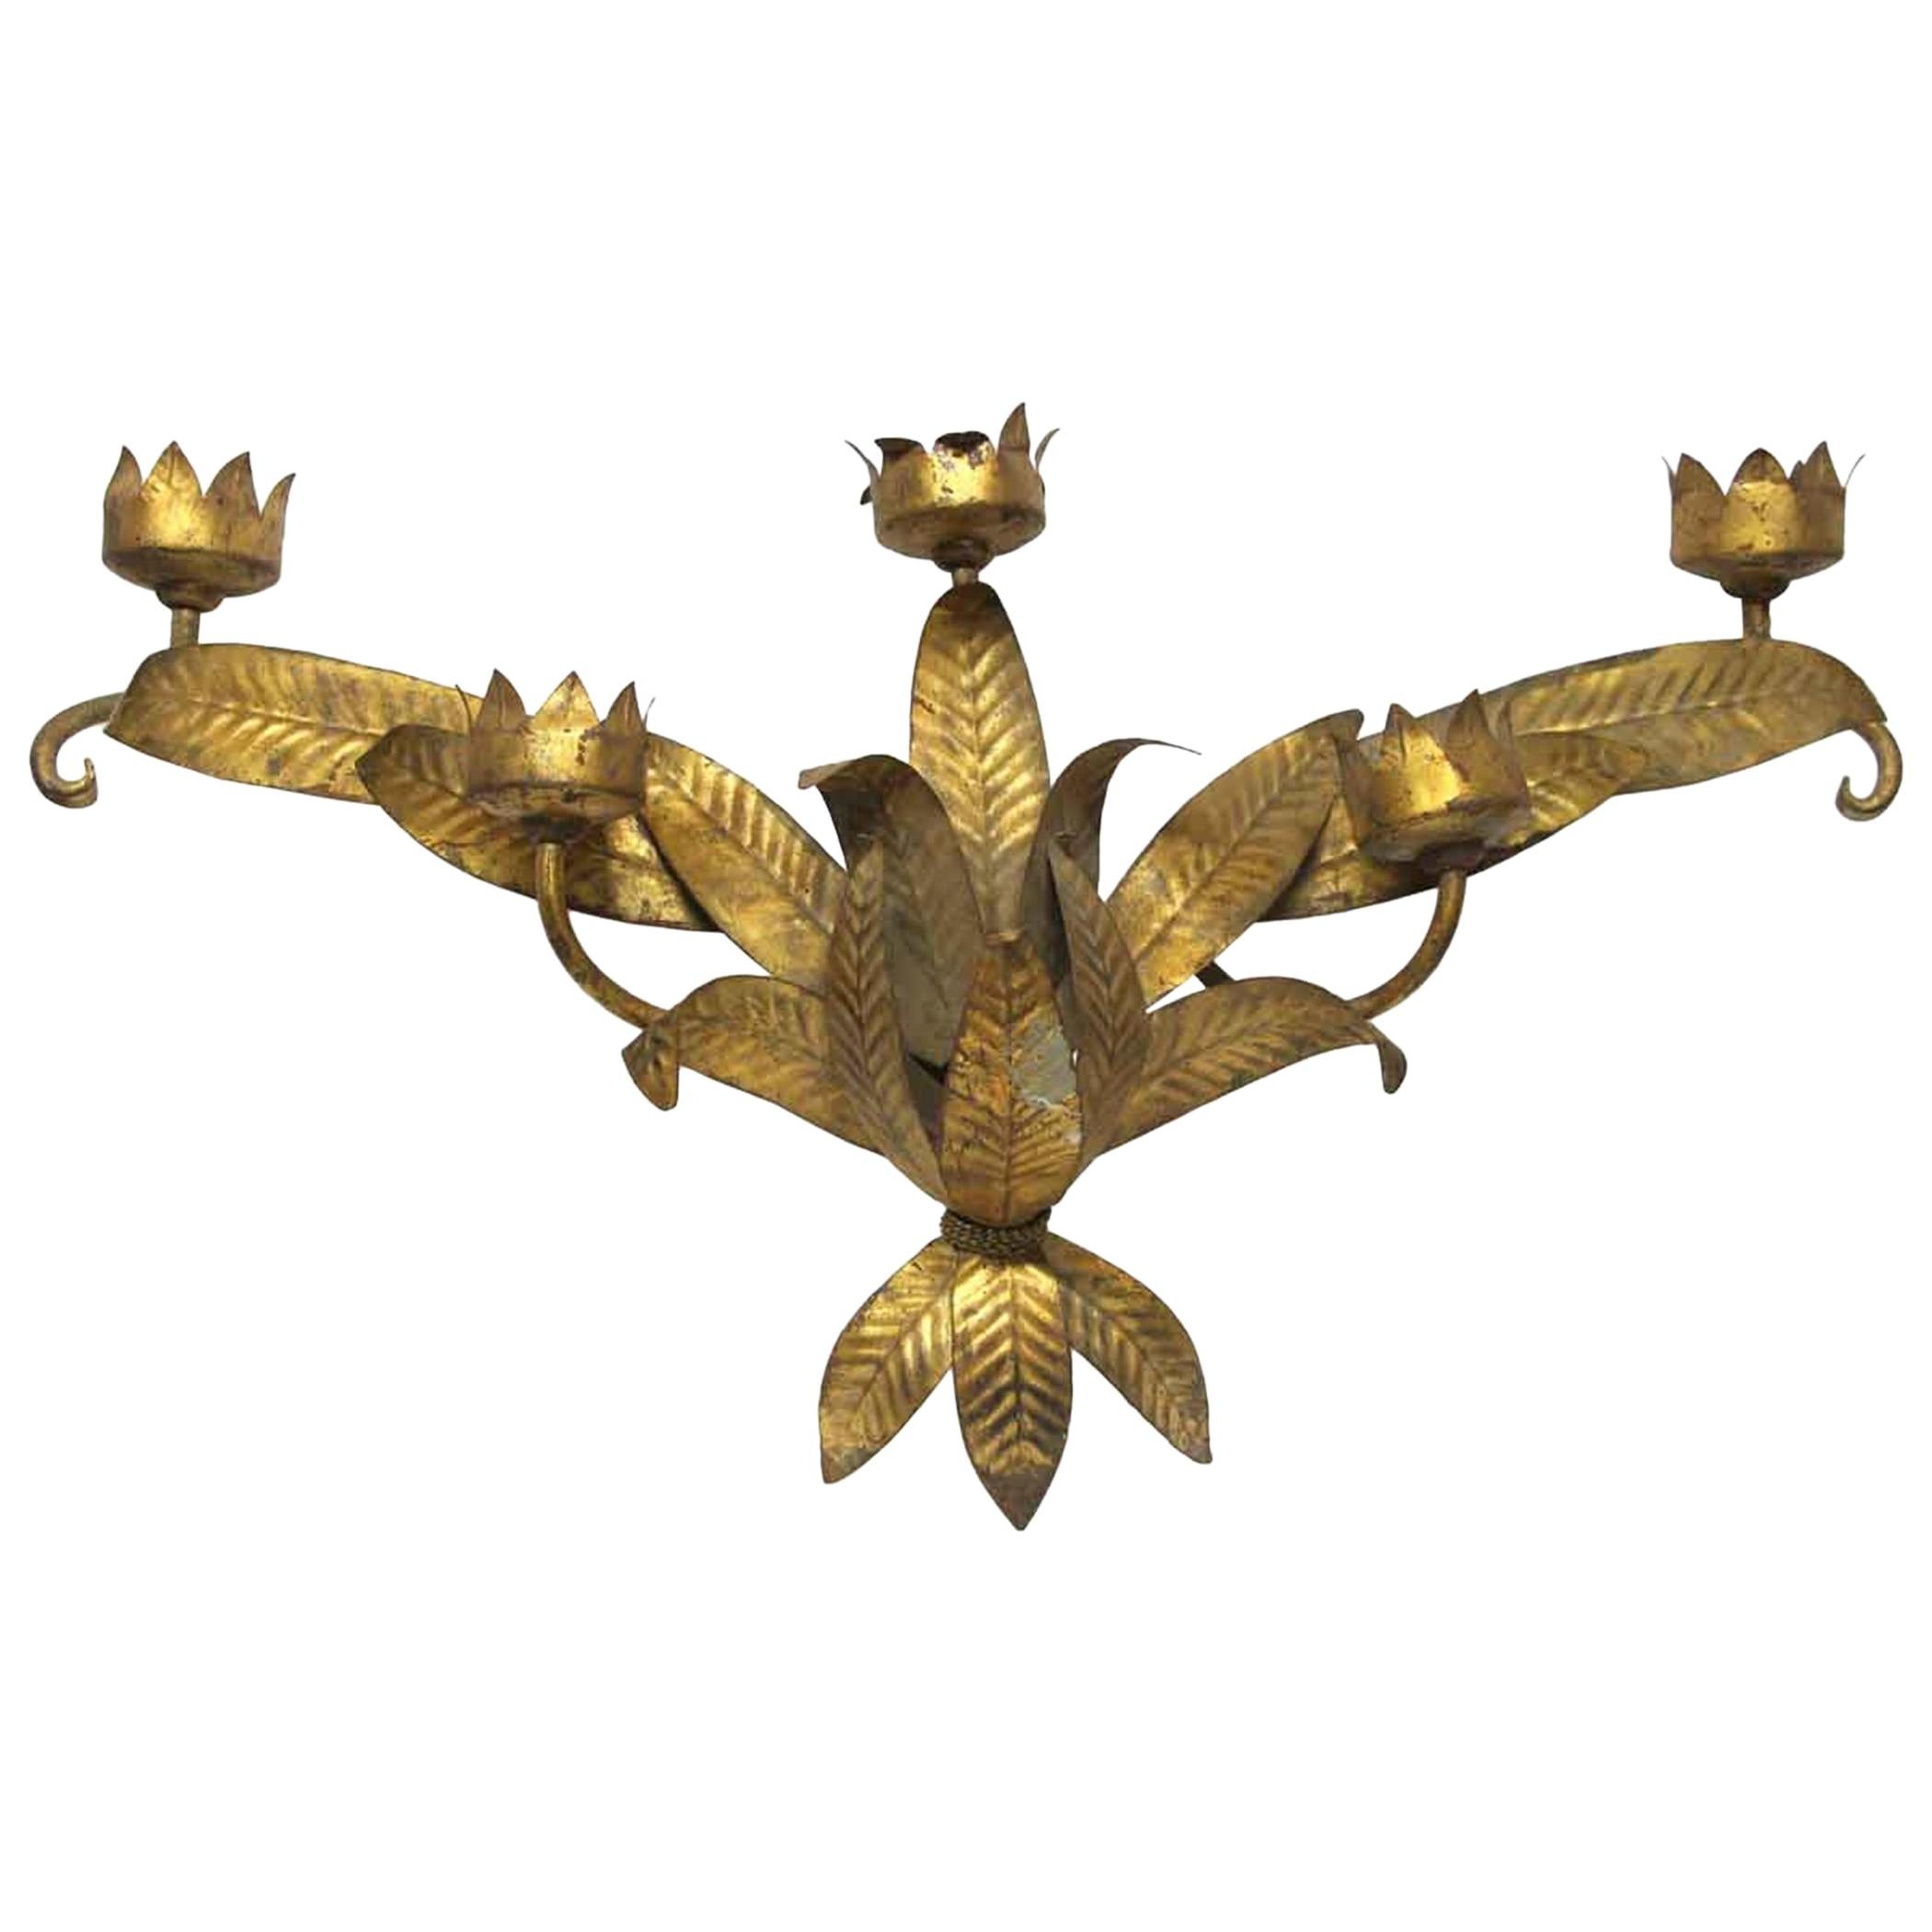 Single Hand Hammered Five Light Floral Steel Candle Wall Sconce with Gold Finish